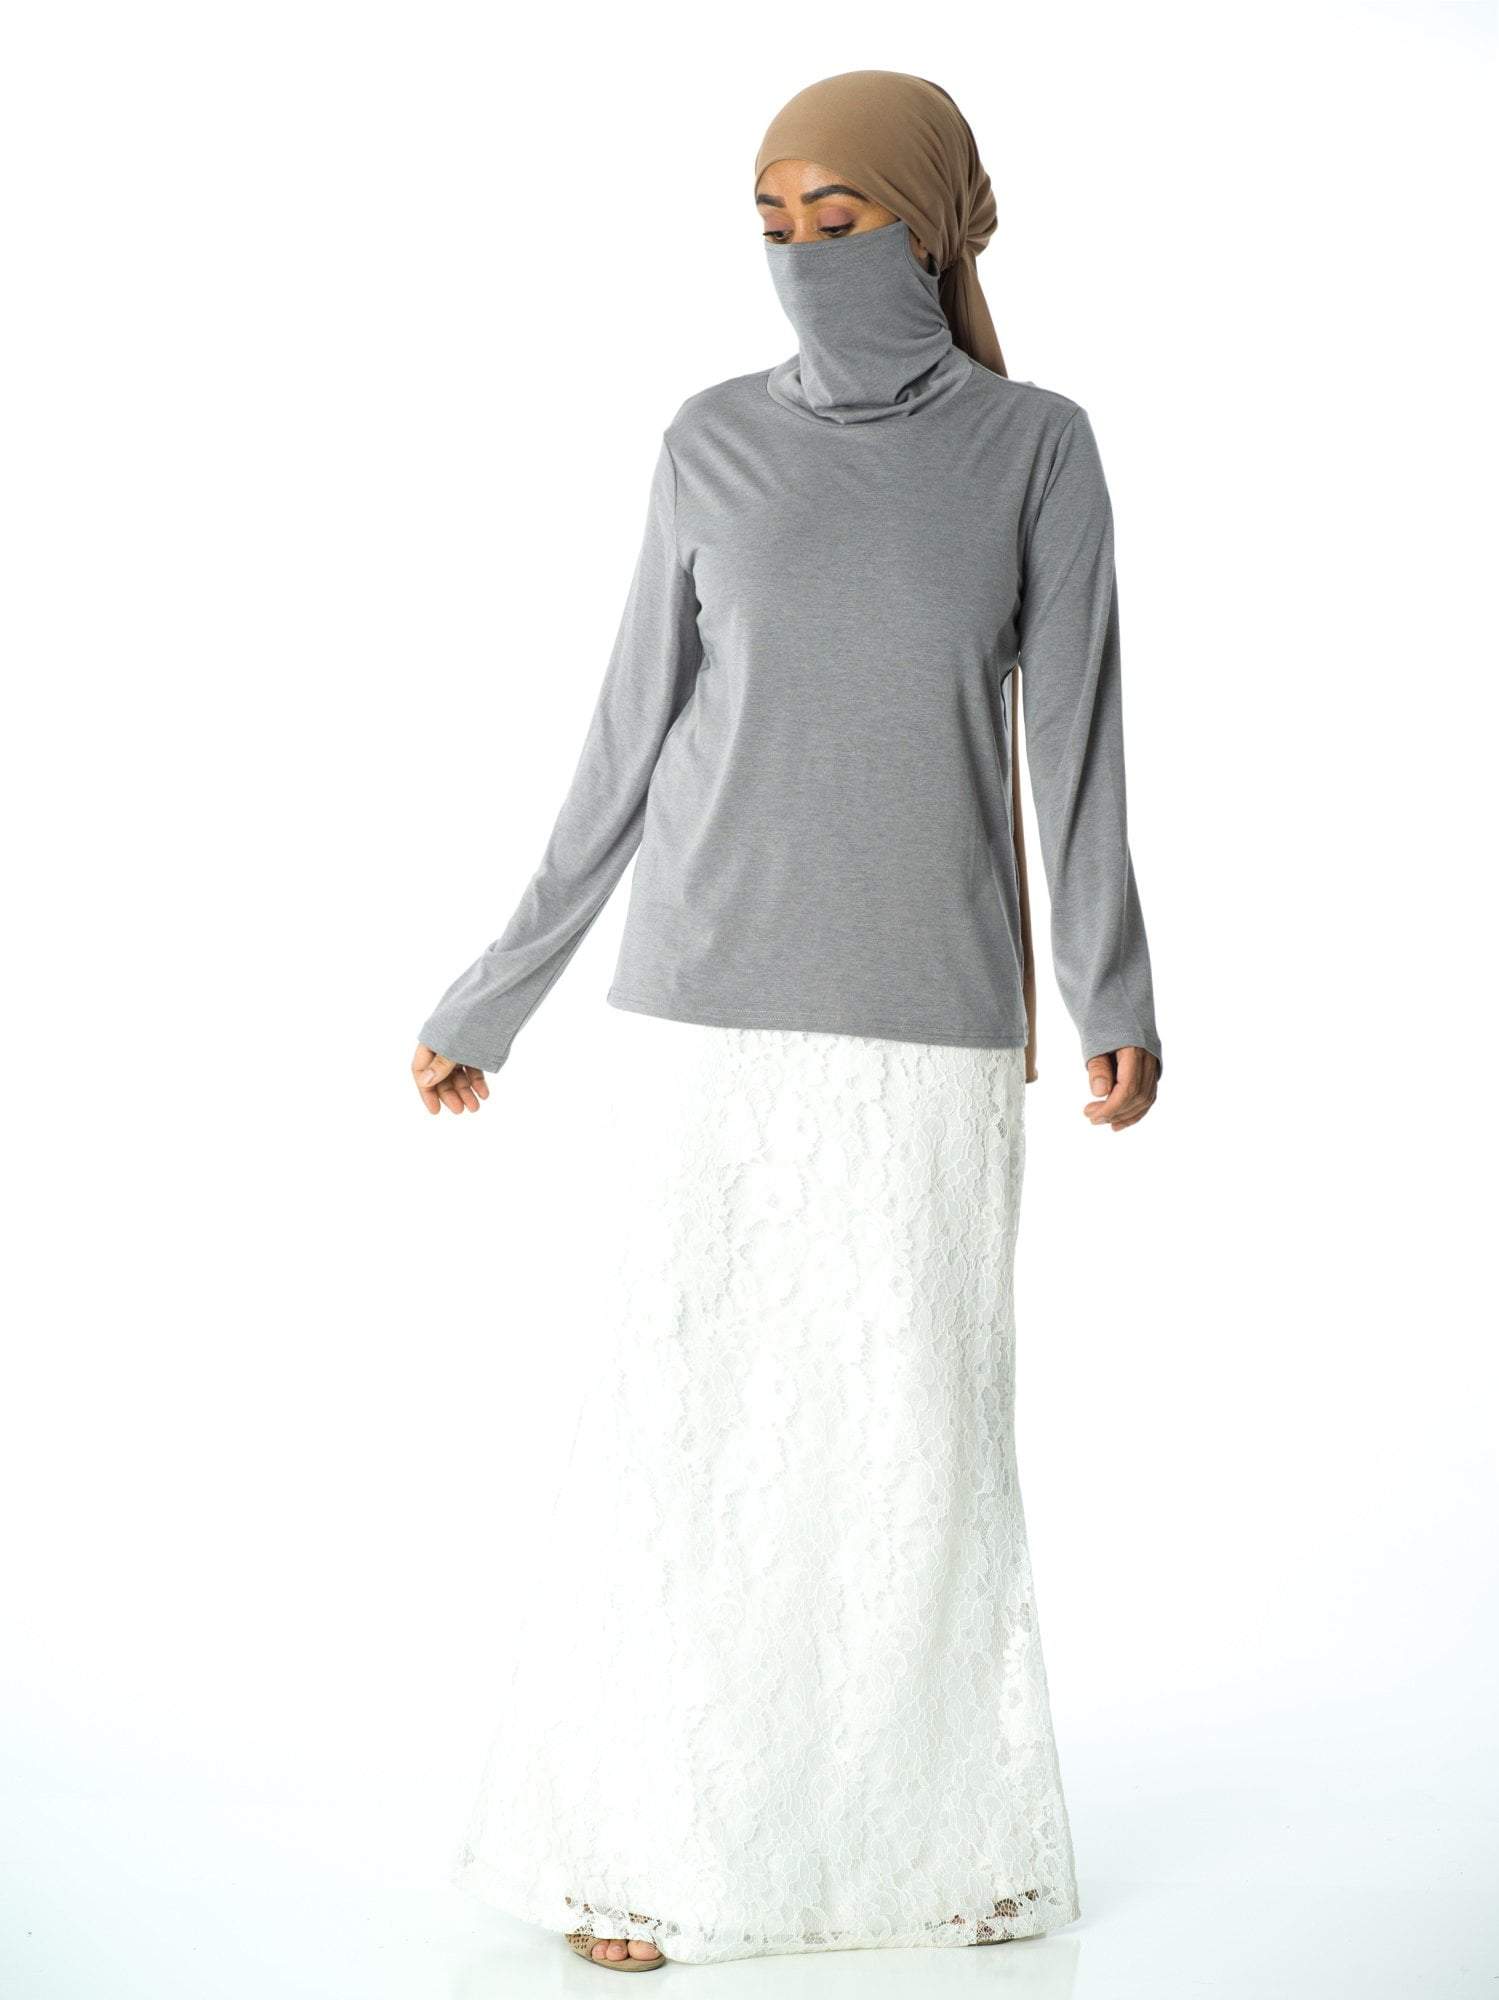 T-shirt with a built-in face mask - Kabayare Fashion (5961595191445)